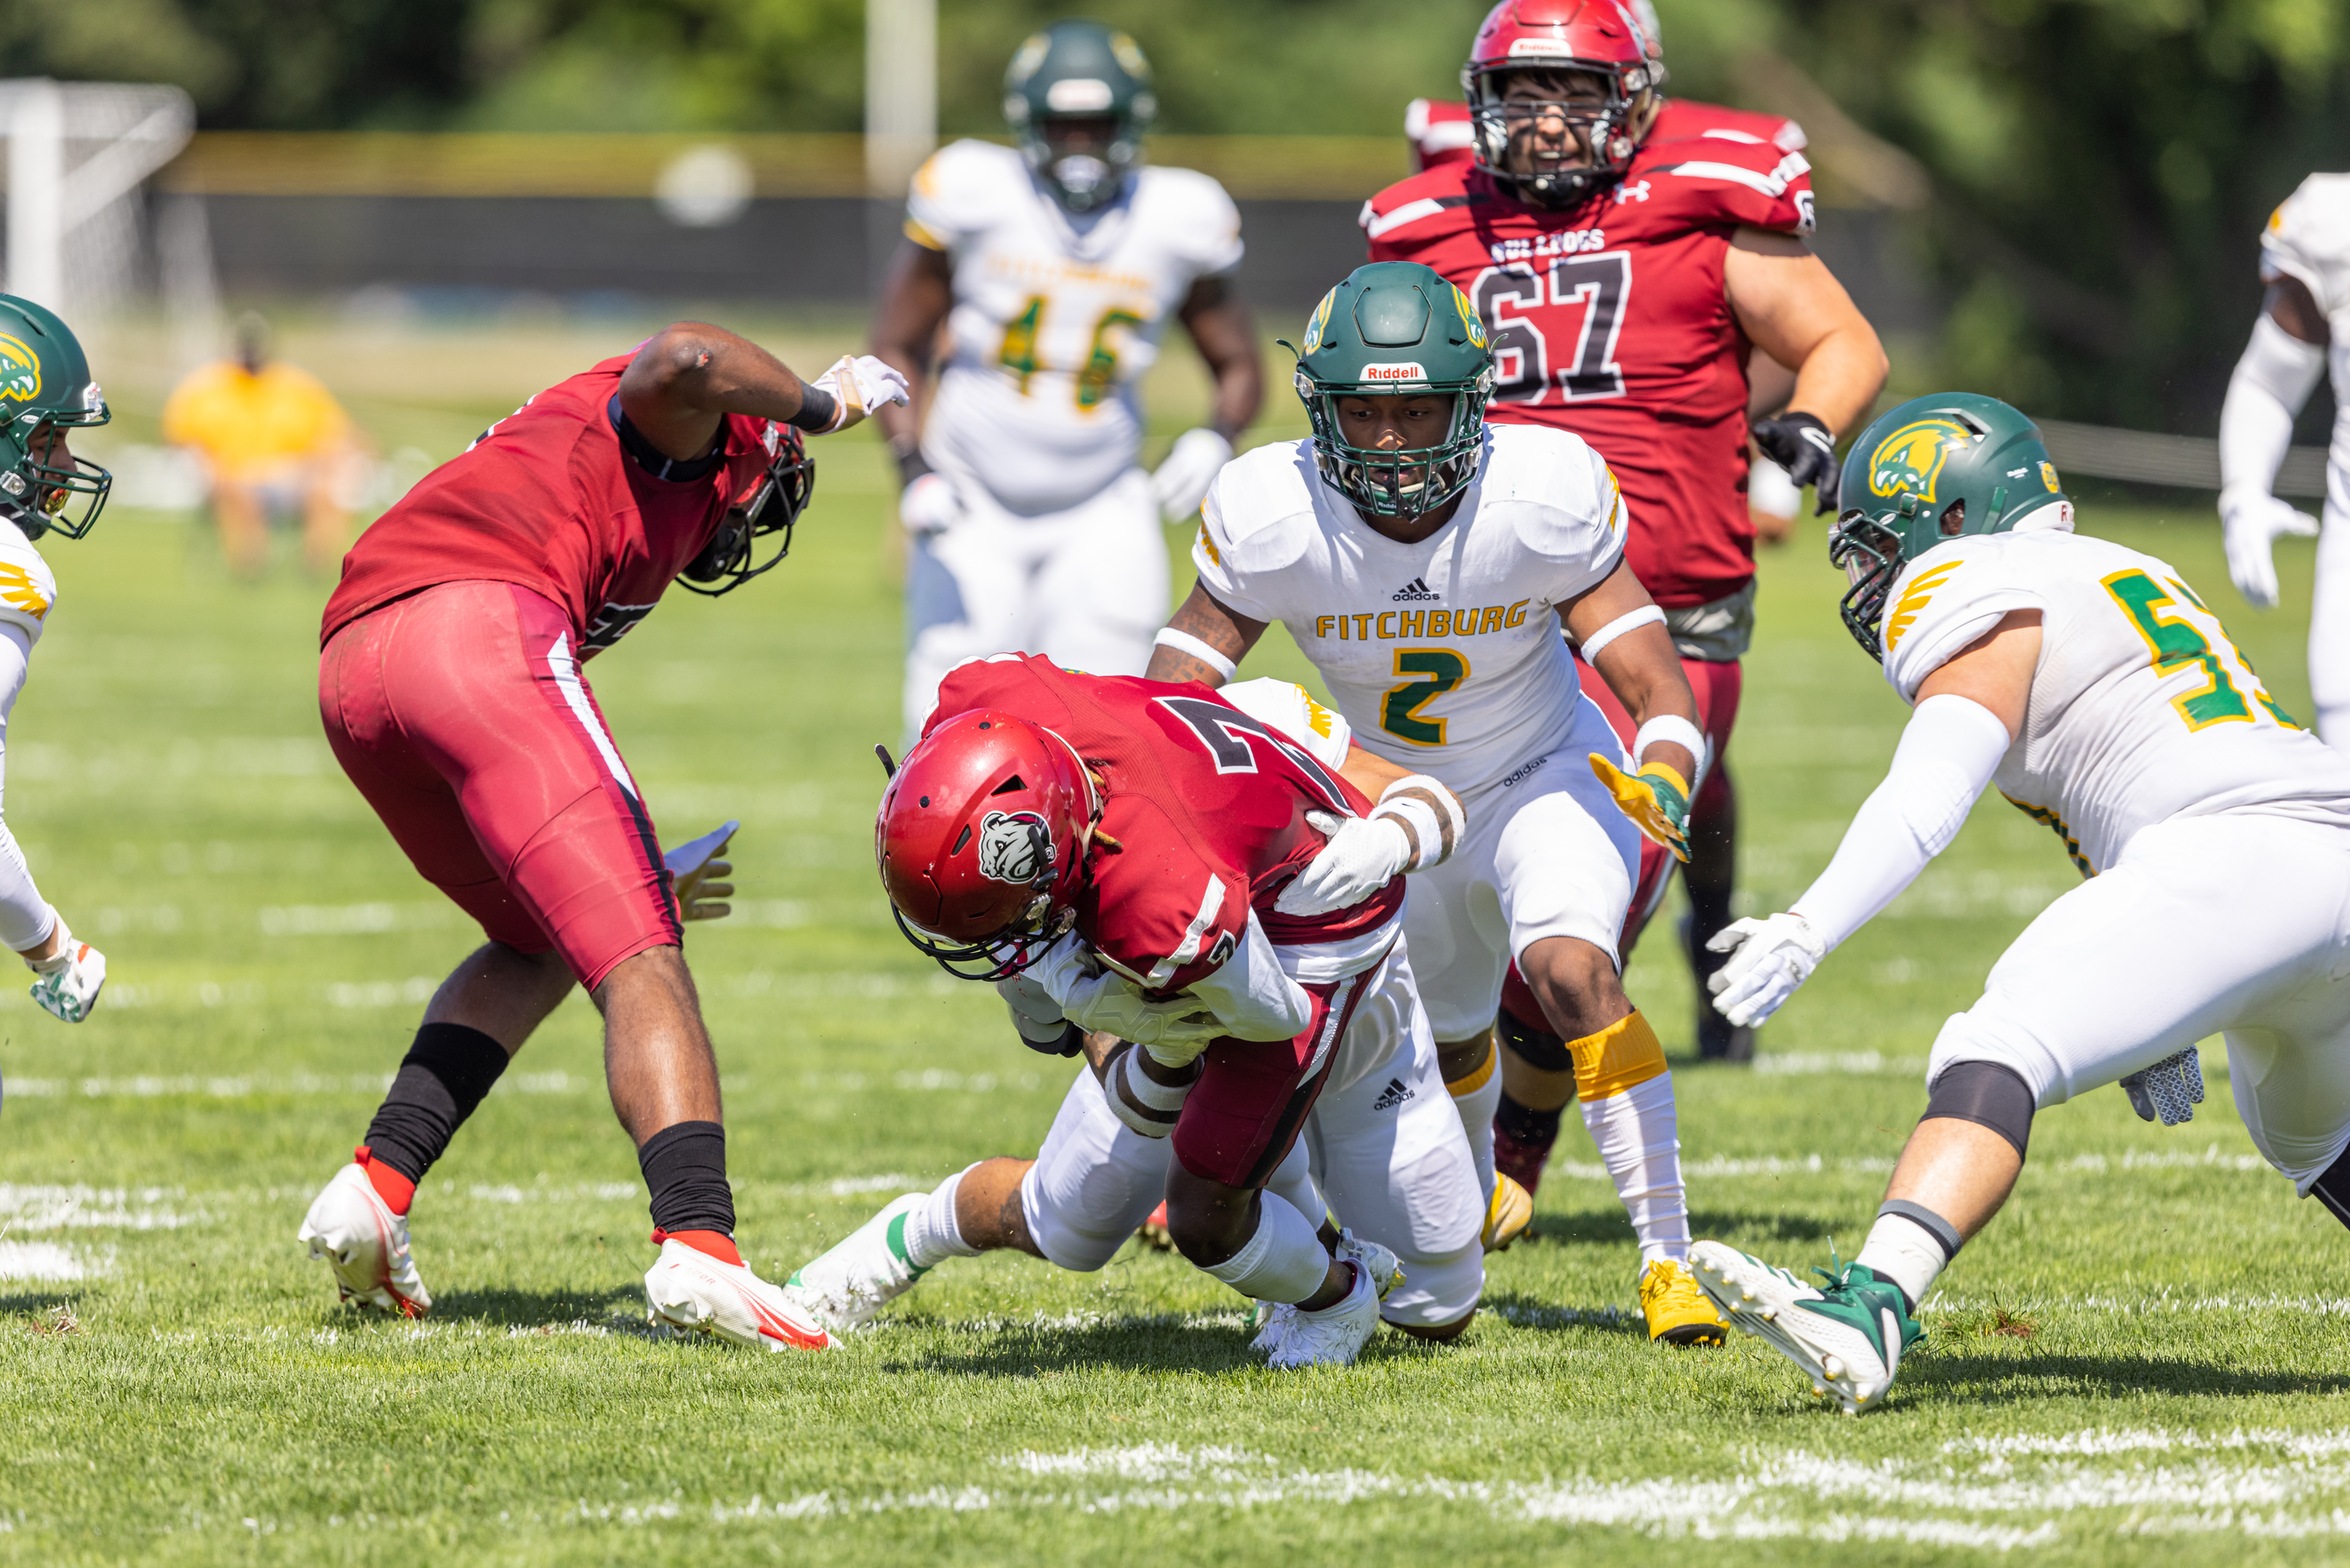 Falcons Fall to Panthers, 36-0 In MASCAC Action